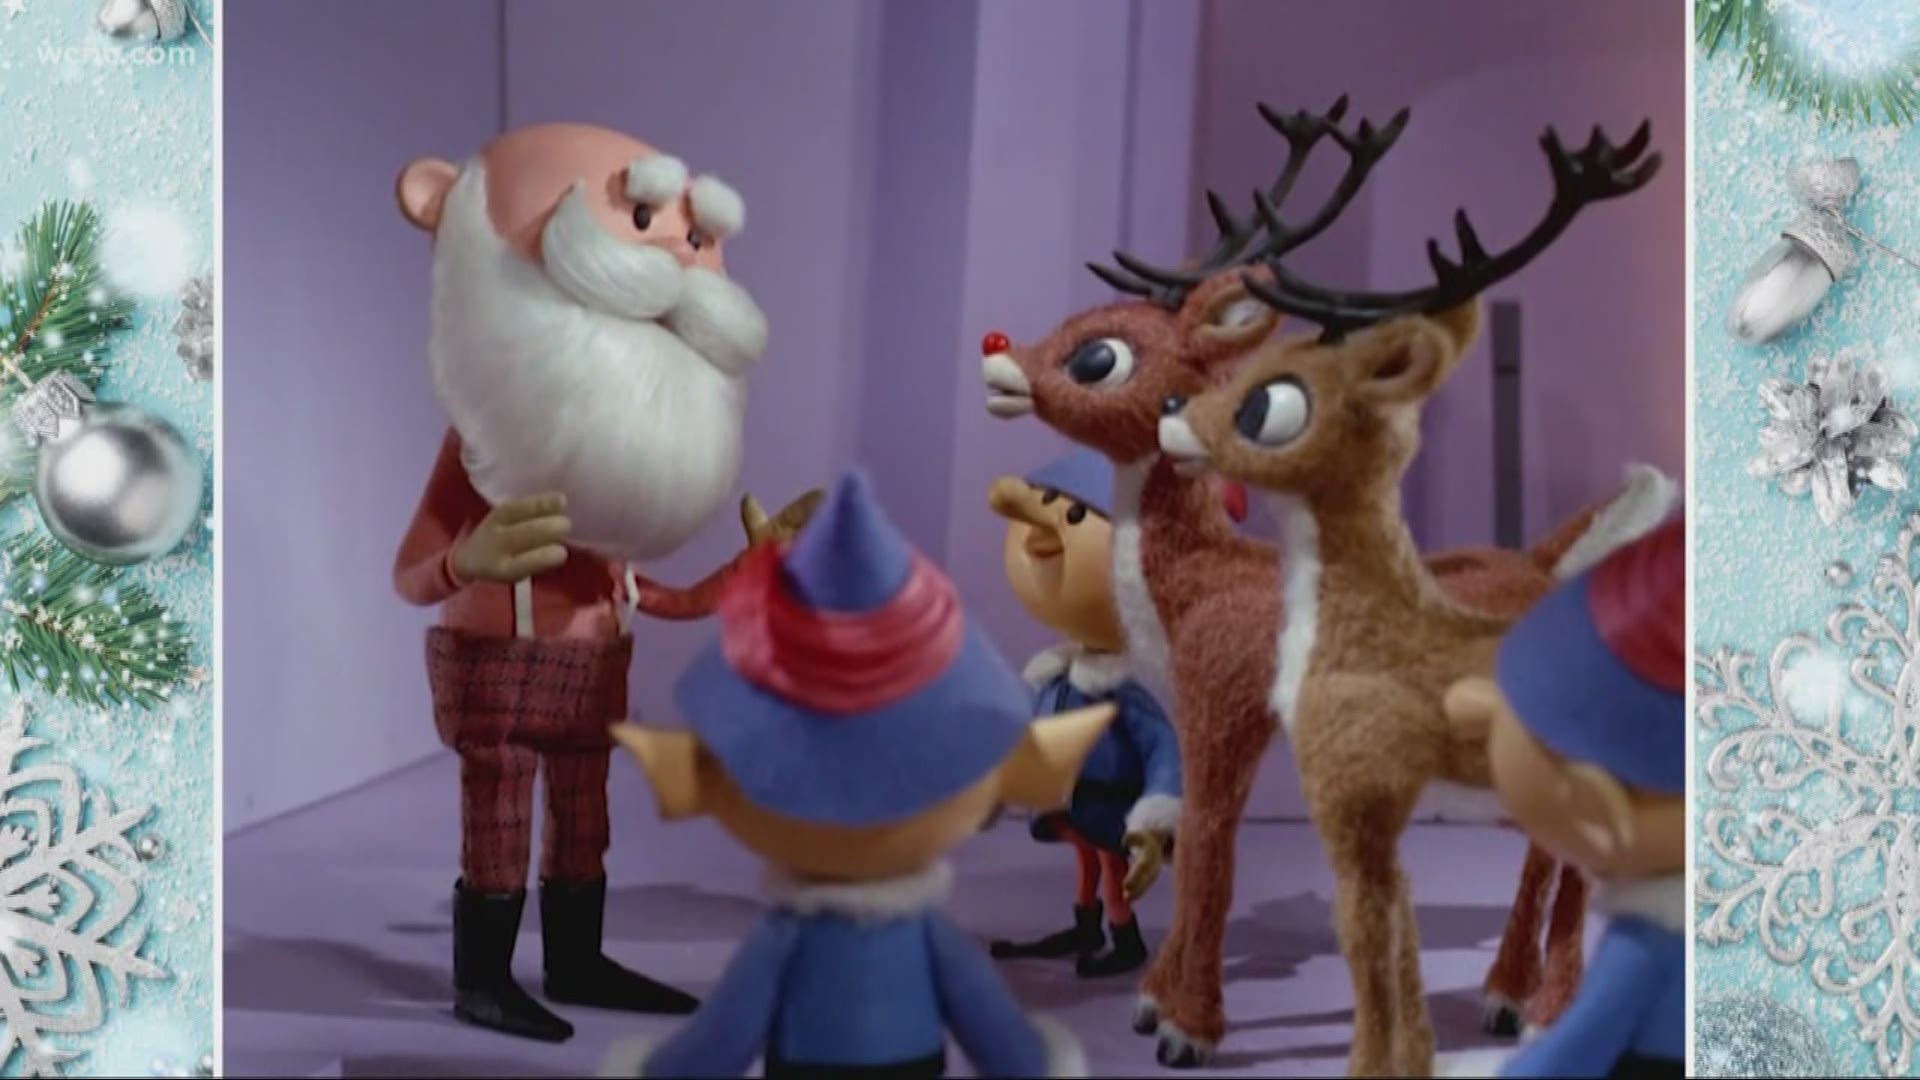 Watch Rudolph the RedNosed Reindeer on KHOU 11 tonight!